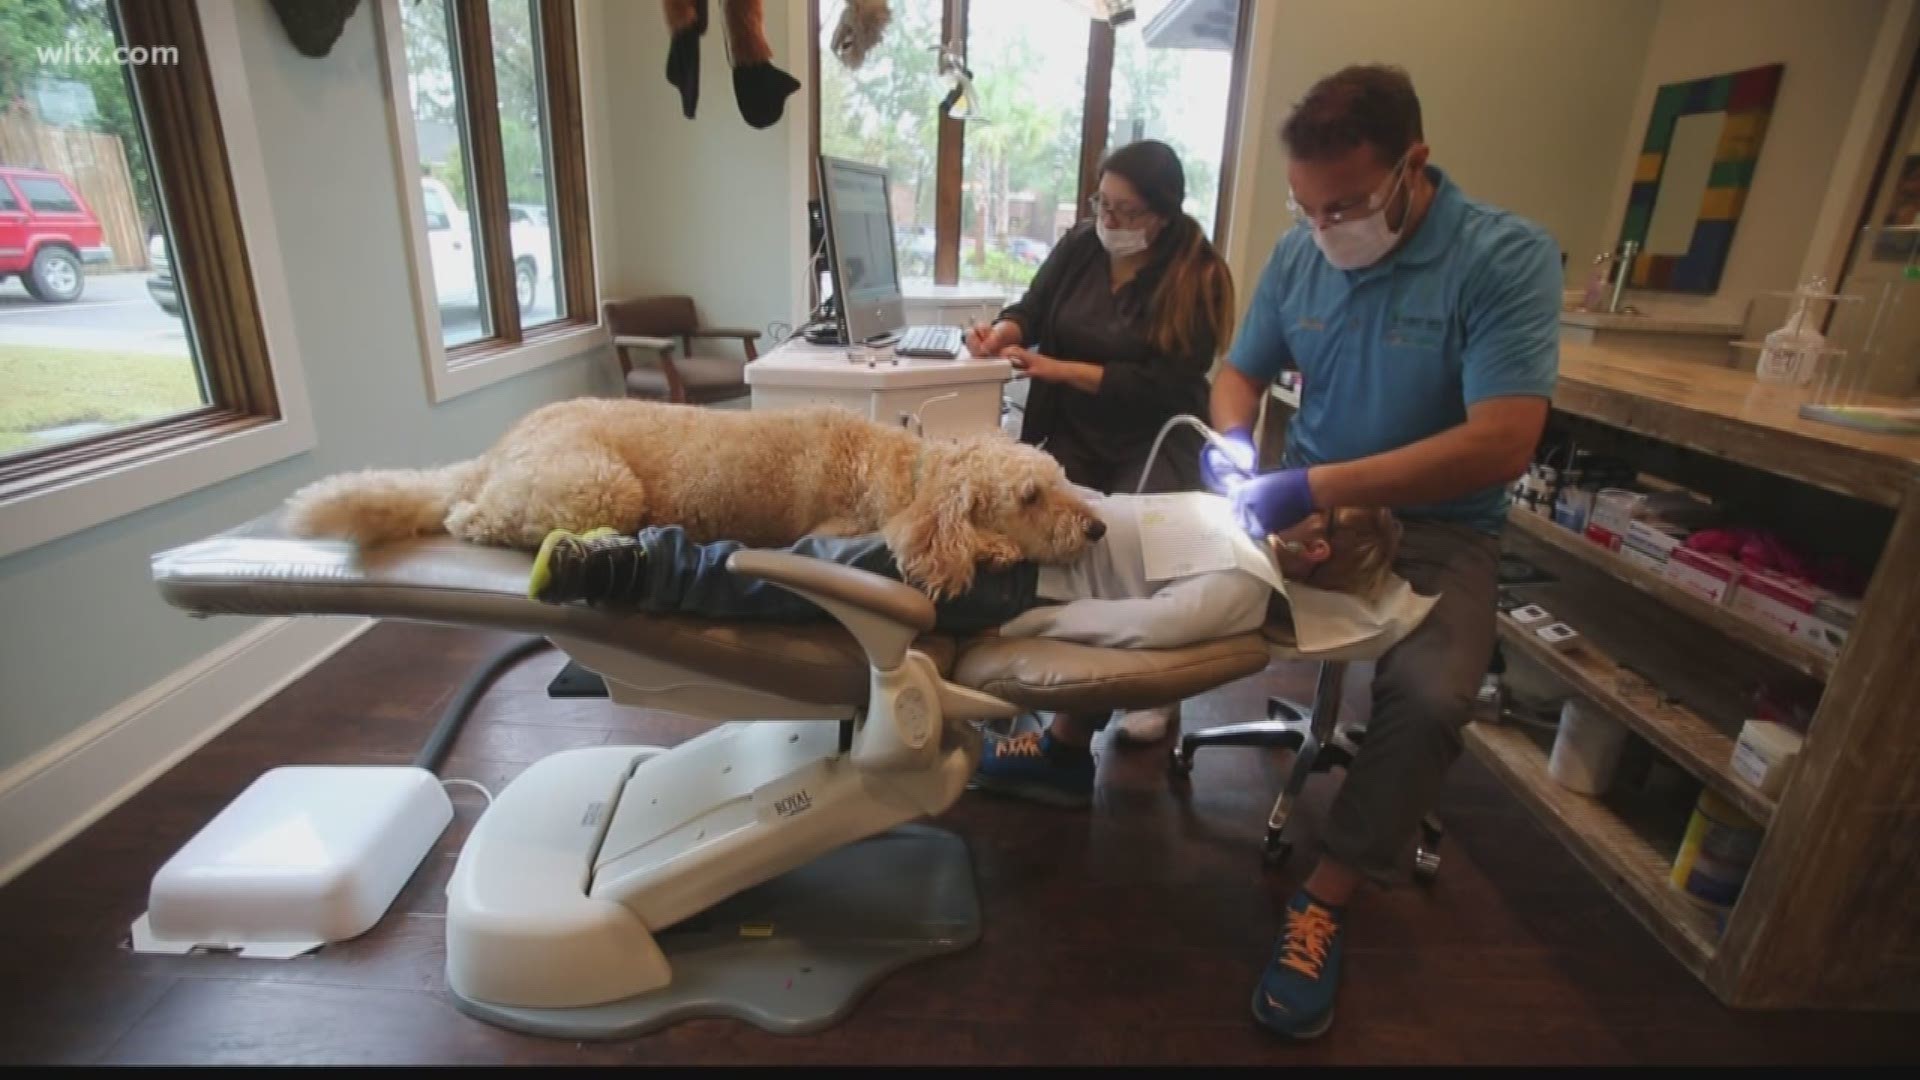 Many Americans do not look forward to going to the dentist--but this new staff member could help